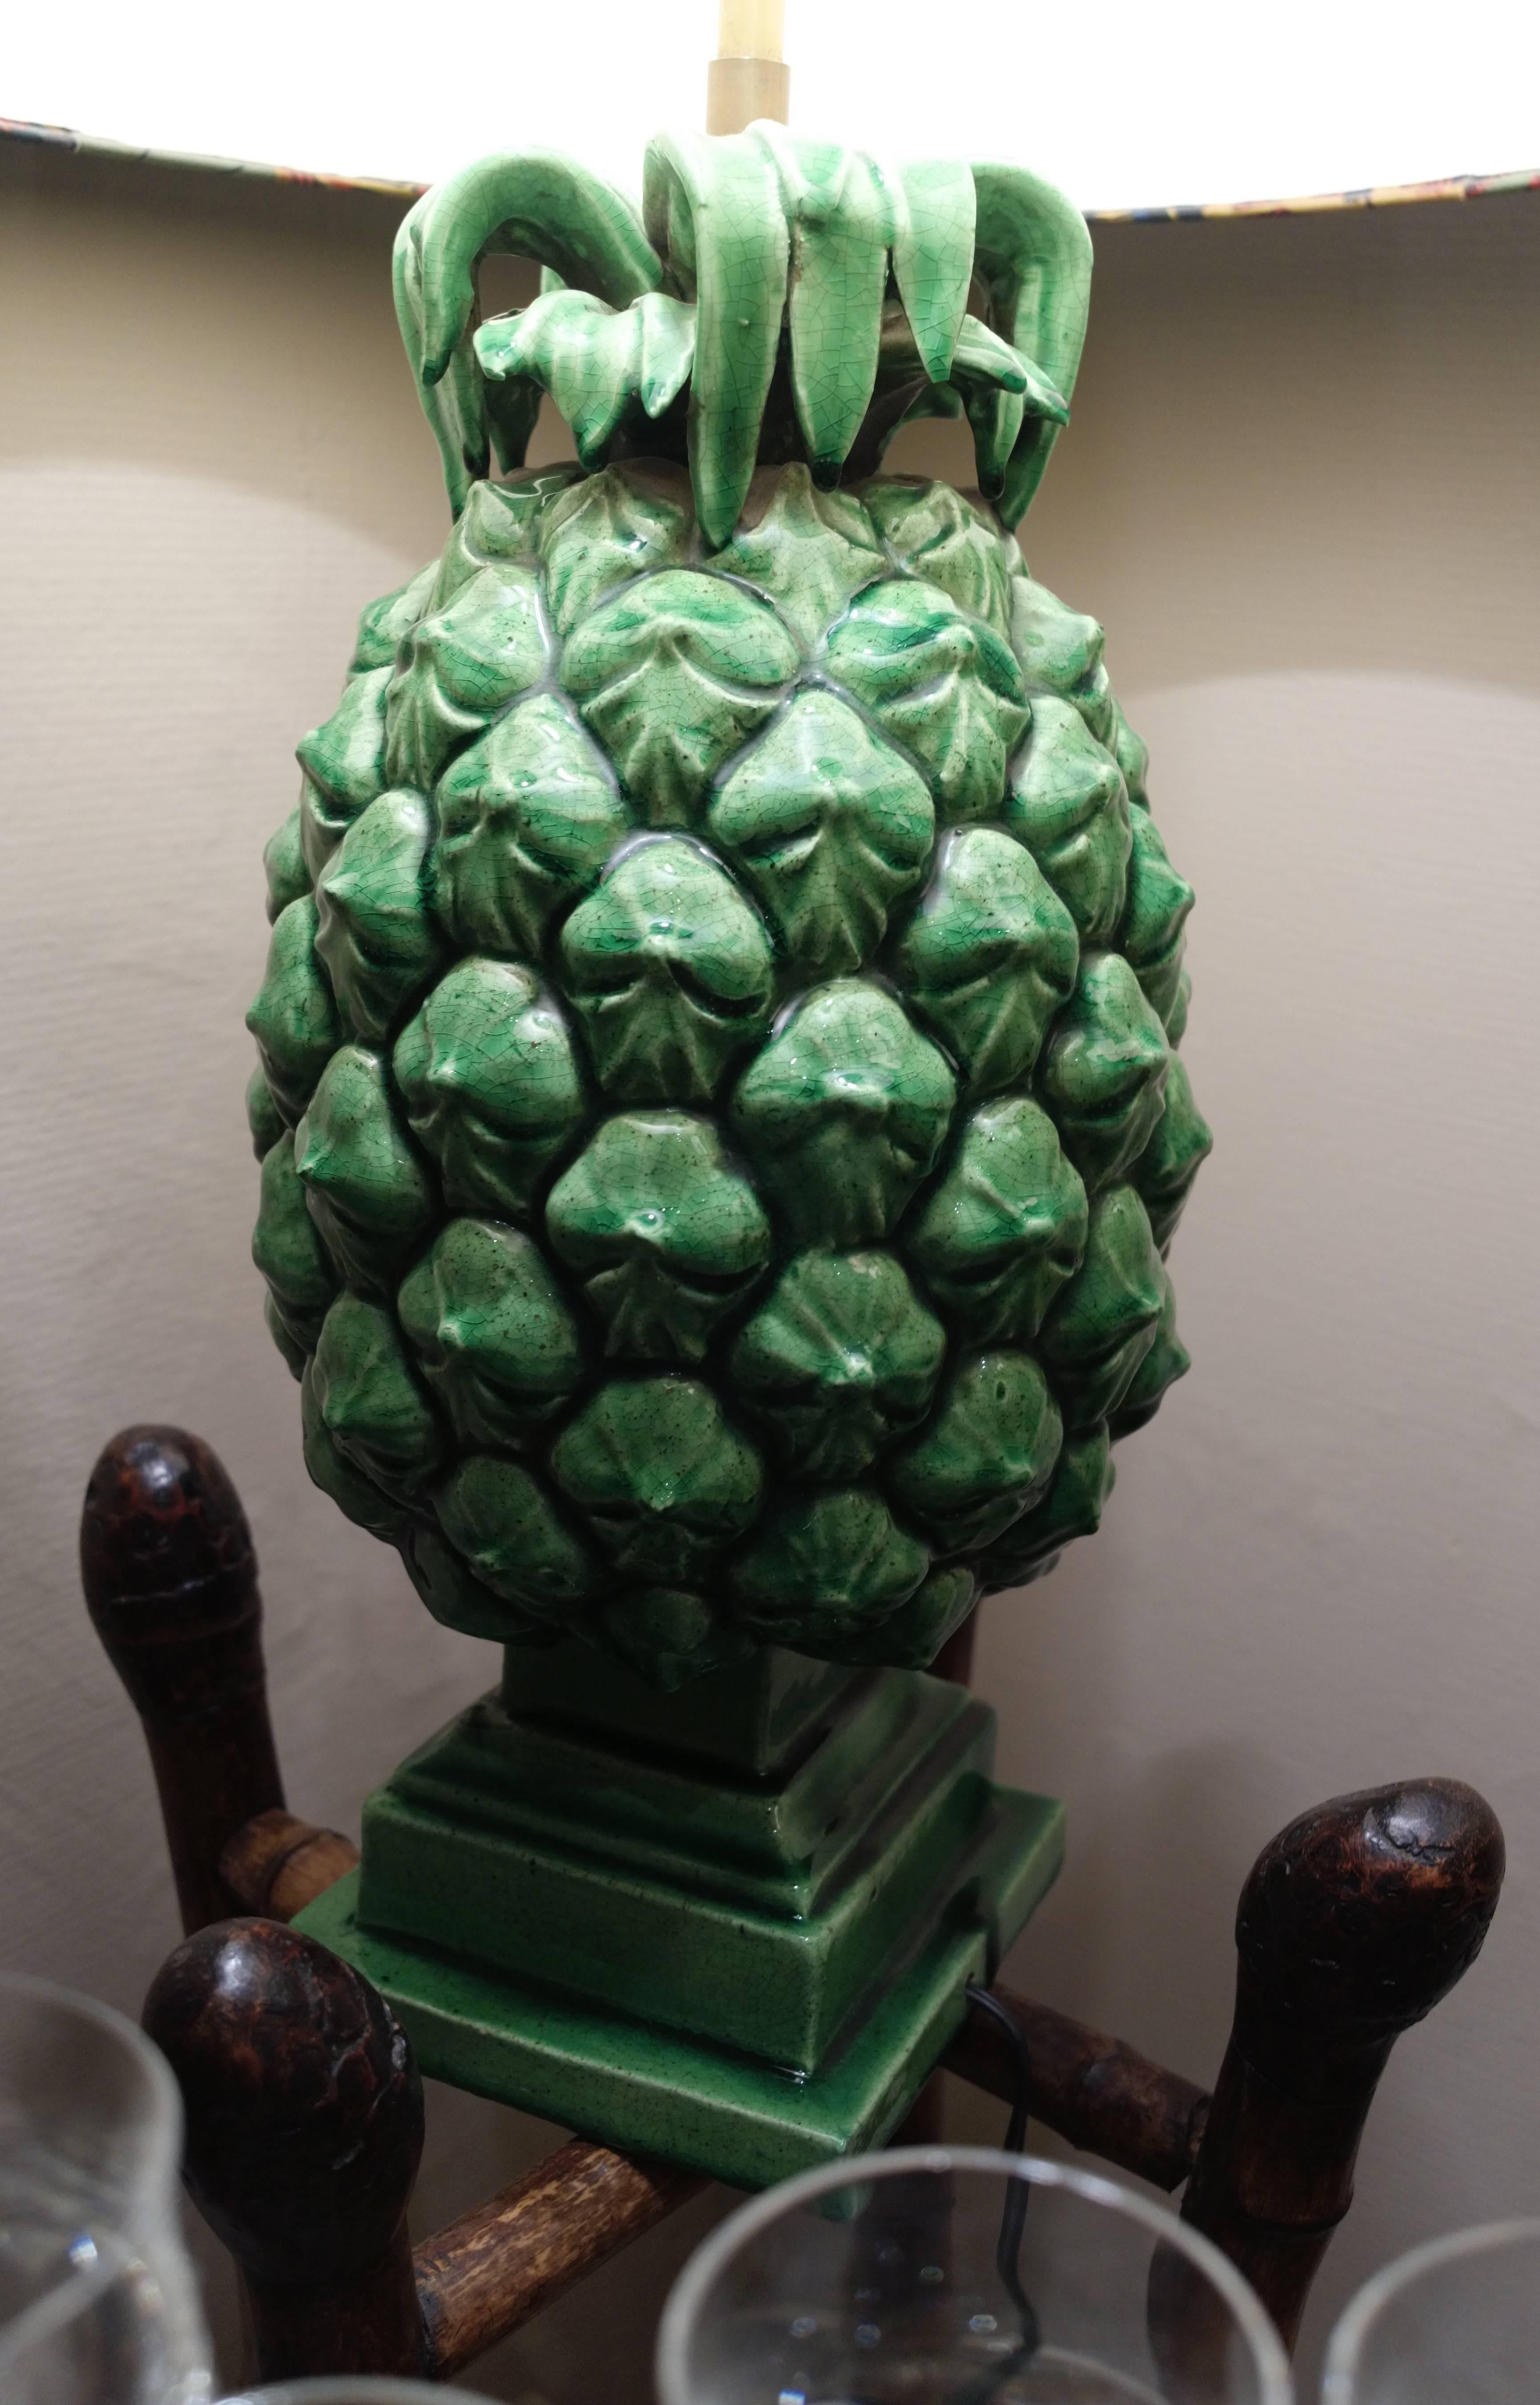 Enameled Pair of Two Green Ceramic Pineapple Table Lamps, circa 1970, 20th Century